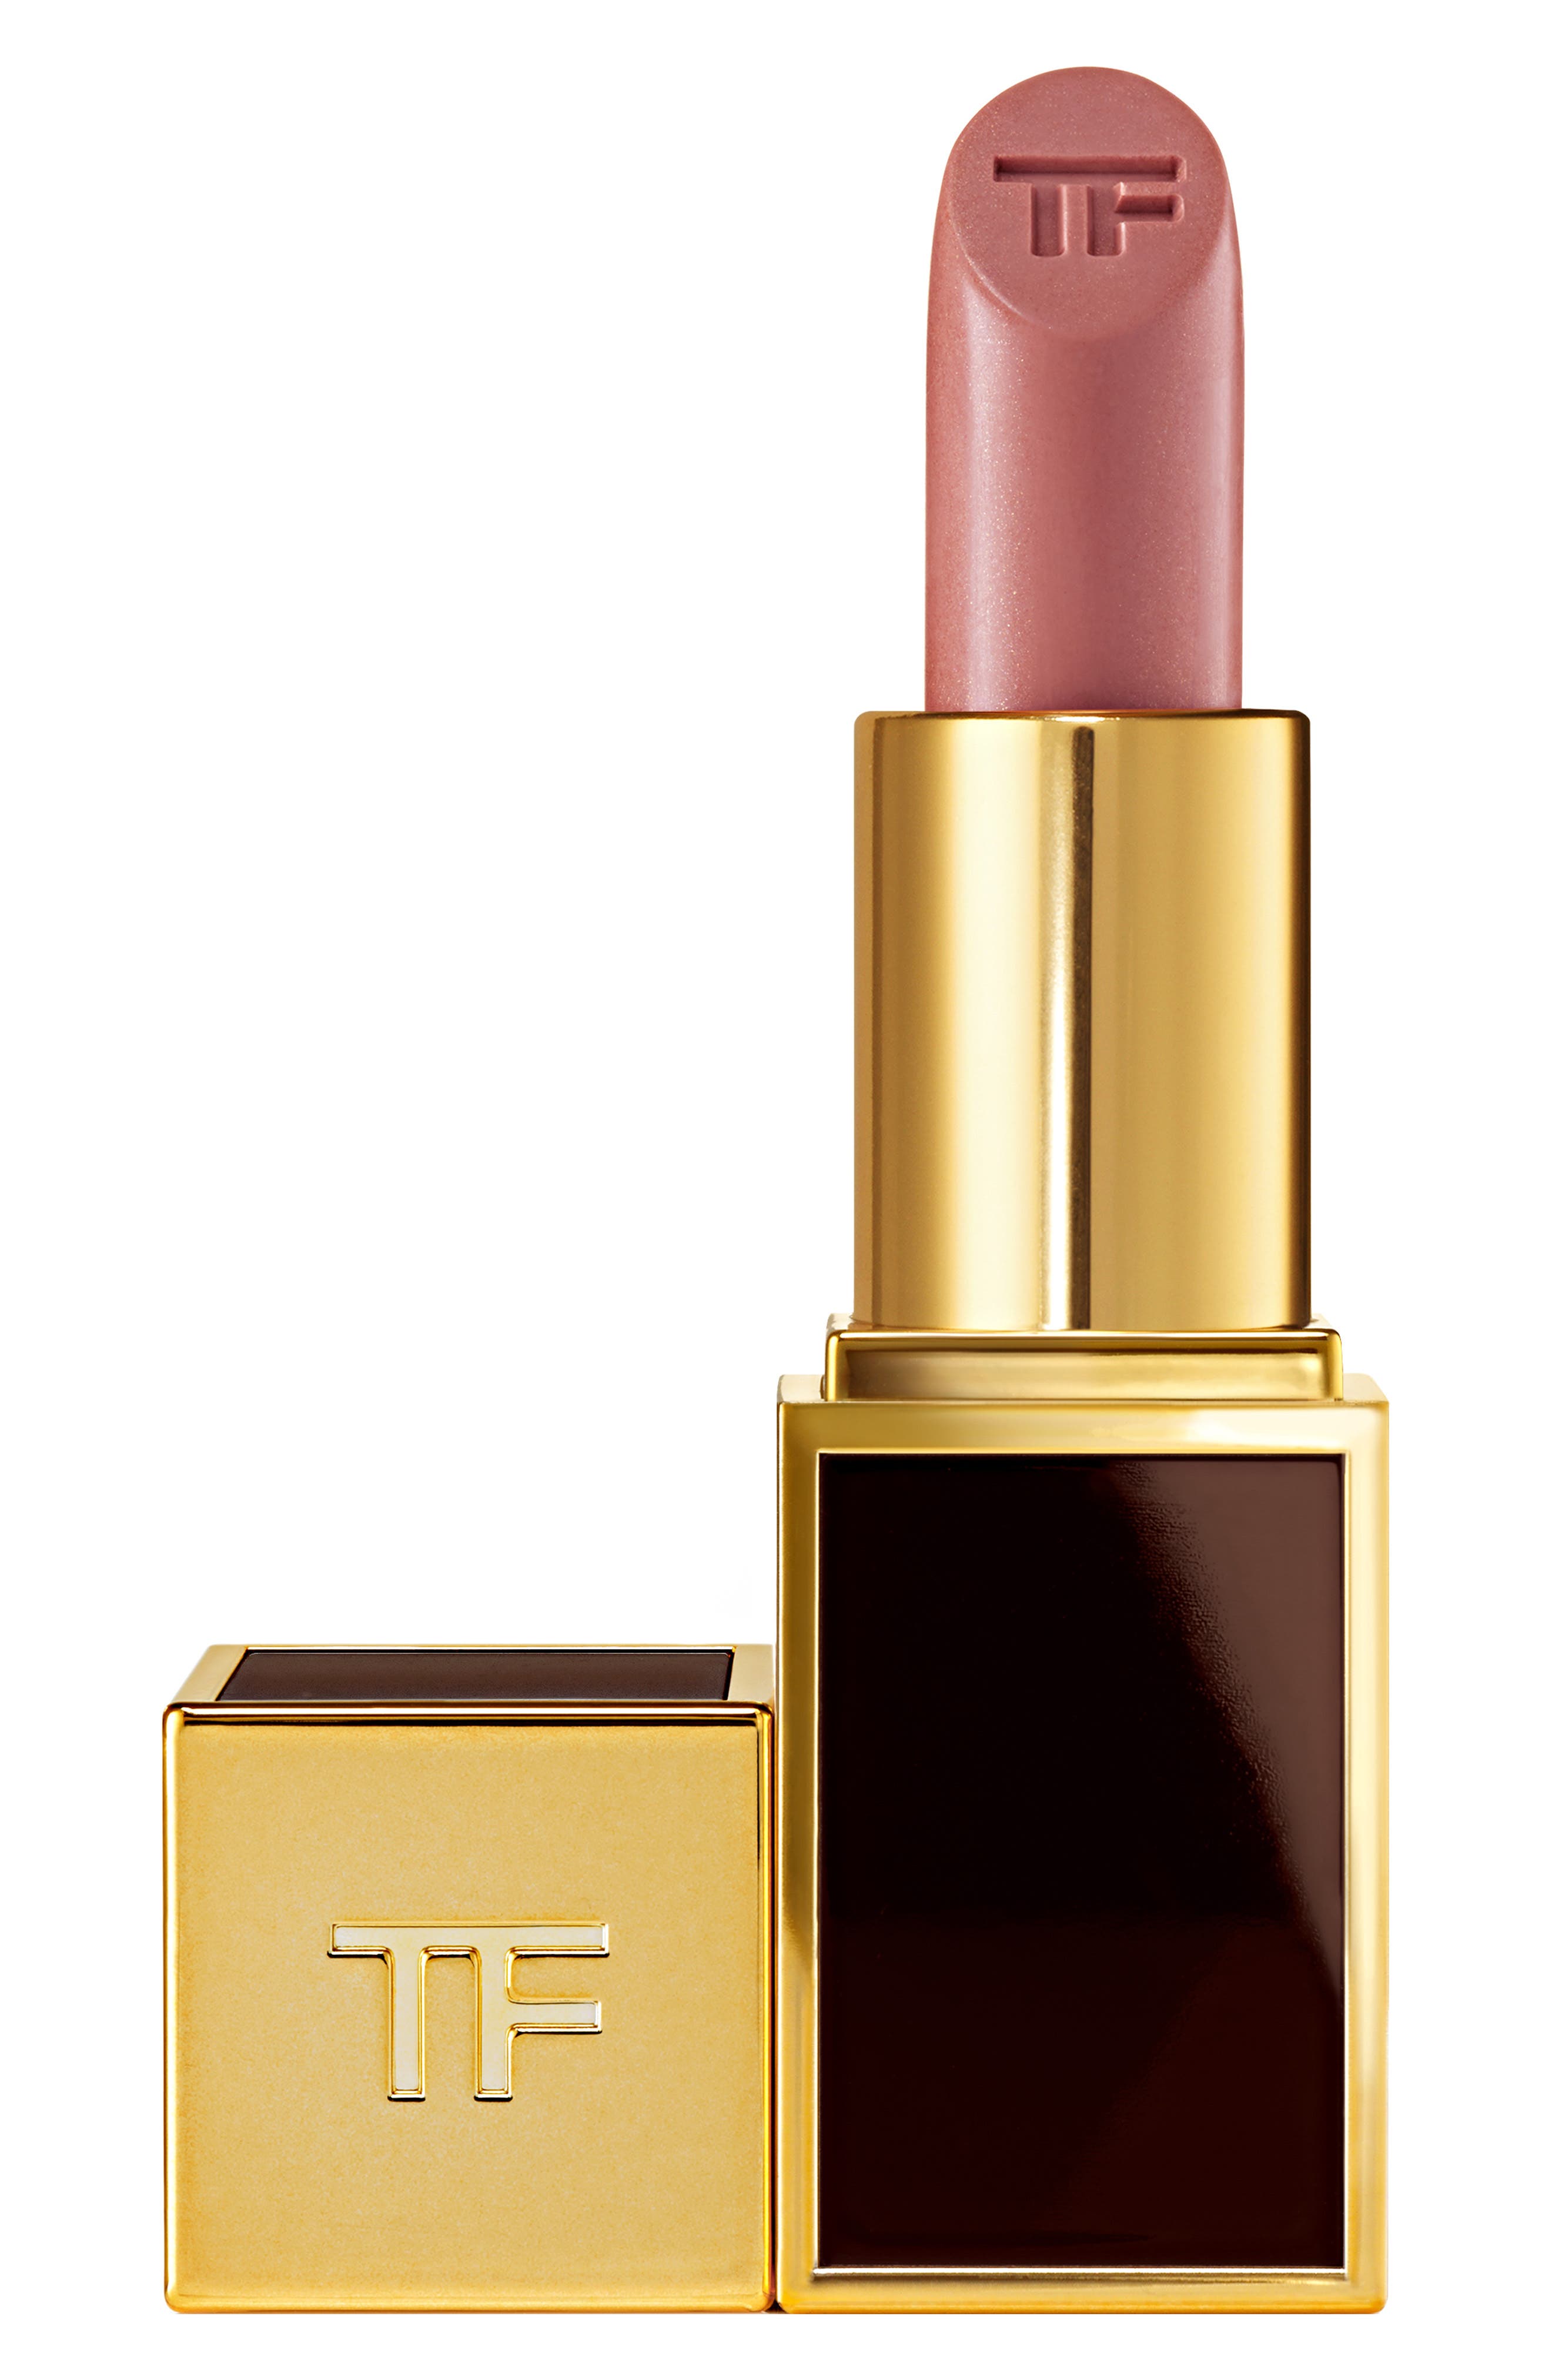 UPC 888066037174 product image for Tom Ford 'Lips & Boys' Deluxe Mini Lip Color Addison One Size | upcitemdb.com